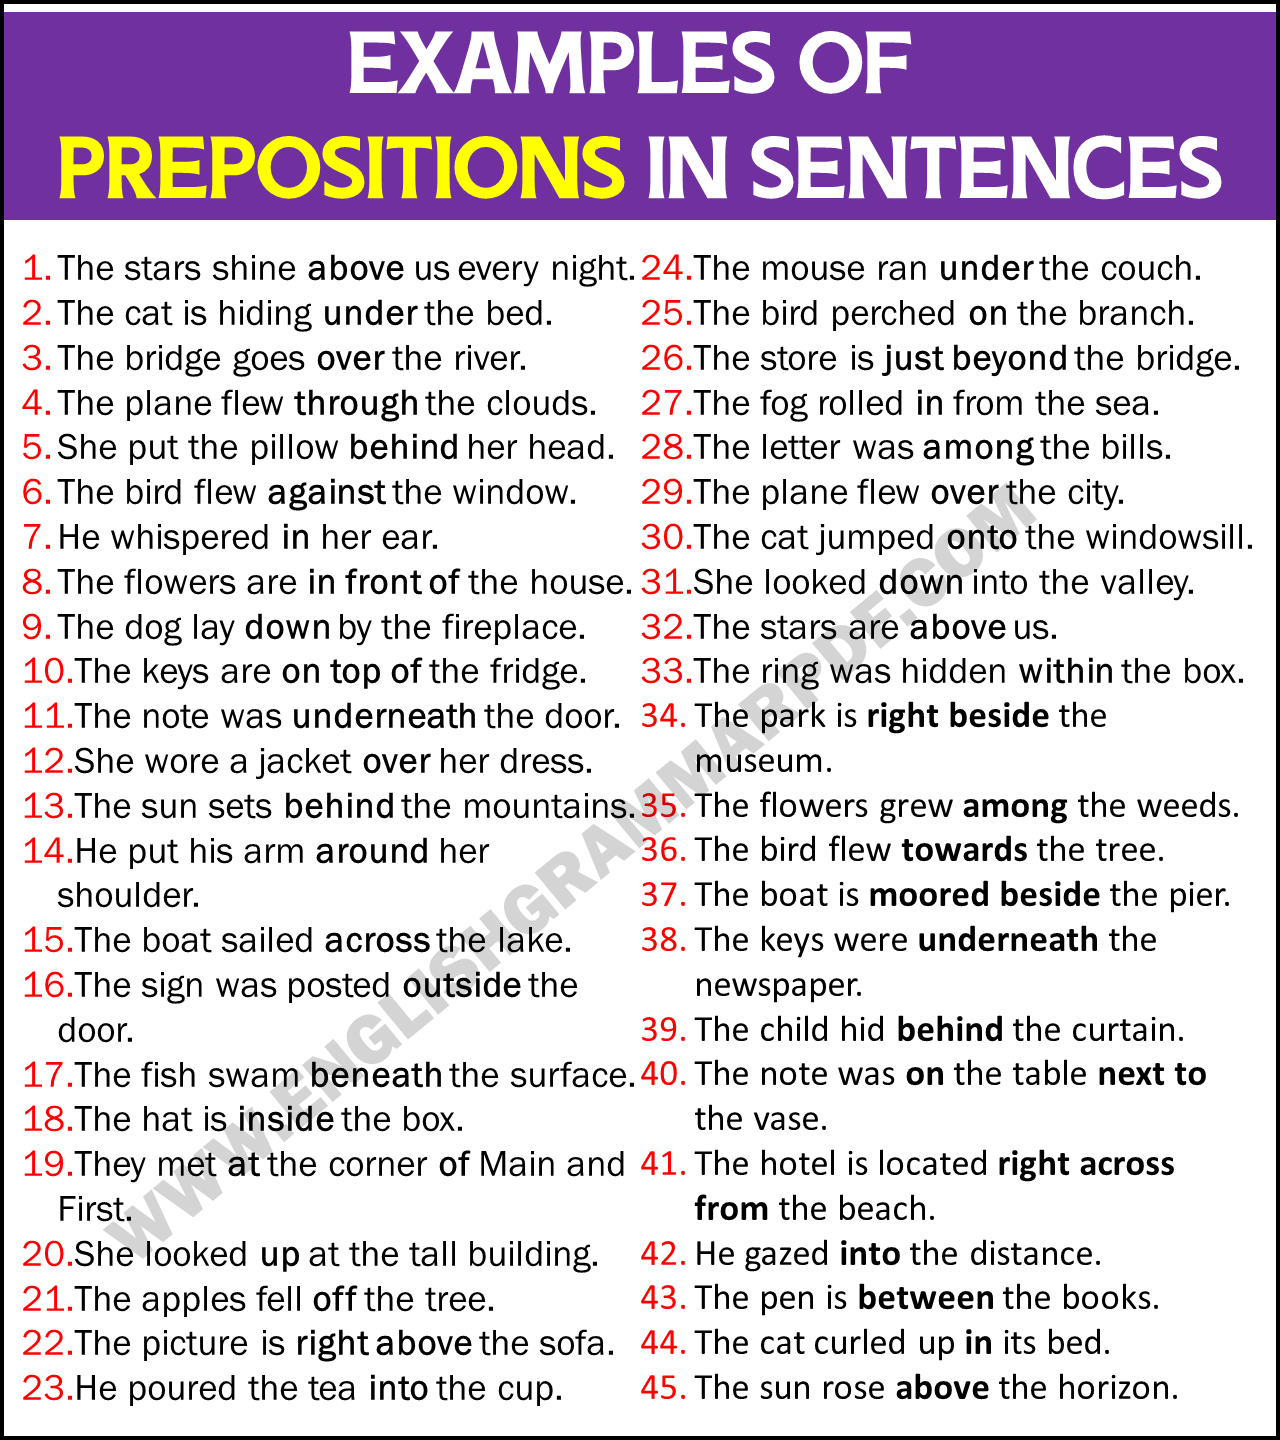 Examples Sentences of Prepositions